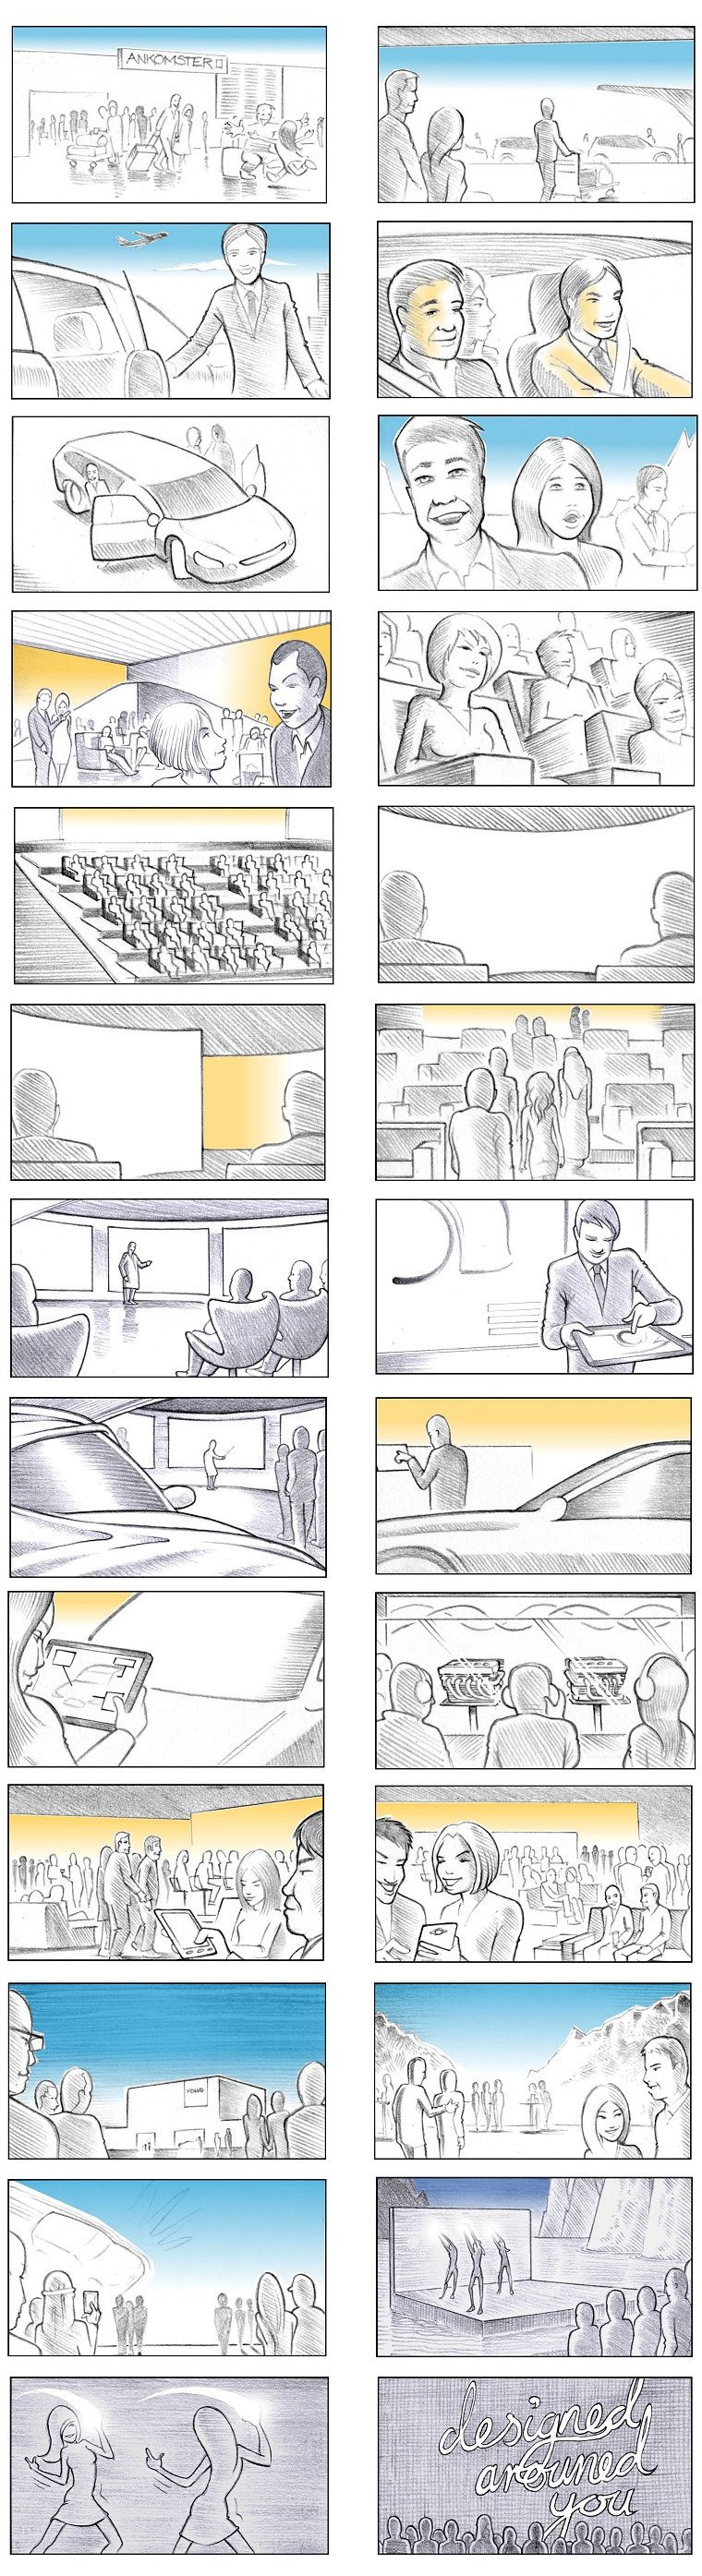 VOLVO EVENT STORYBOARD BY ANDY SPARROW